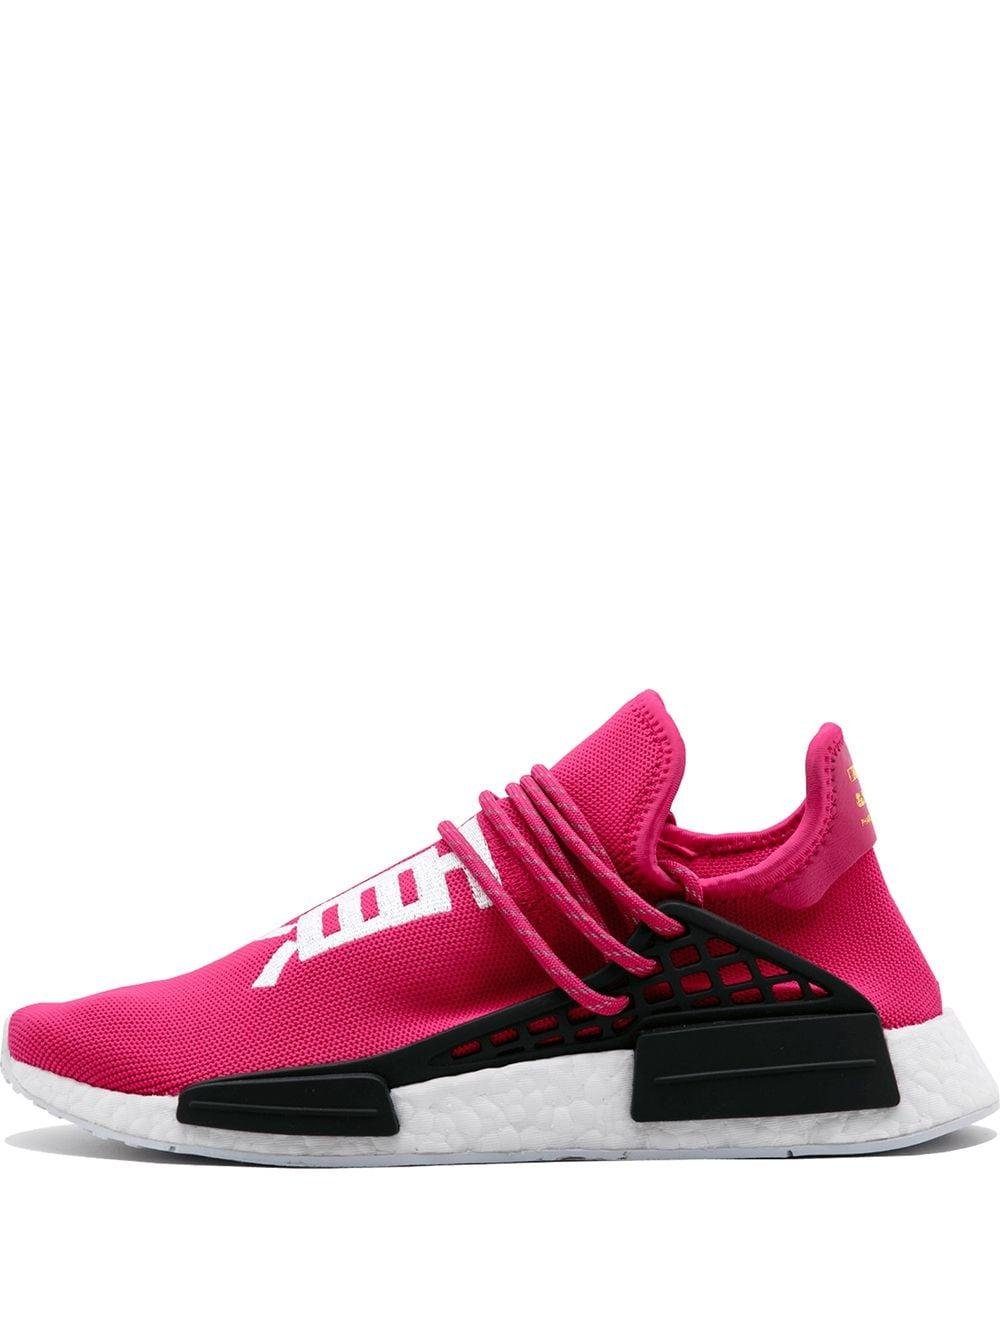 opføre sig Museum tilbehør adidas Pharrell Williams Human Race Nmd Sneakers in Pink for Men - Lyst